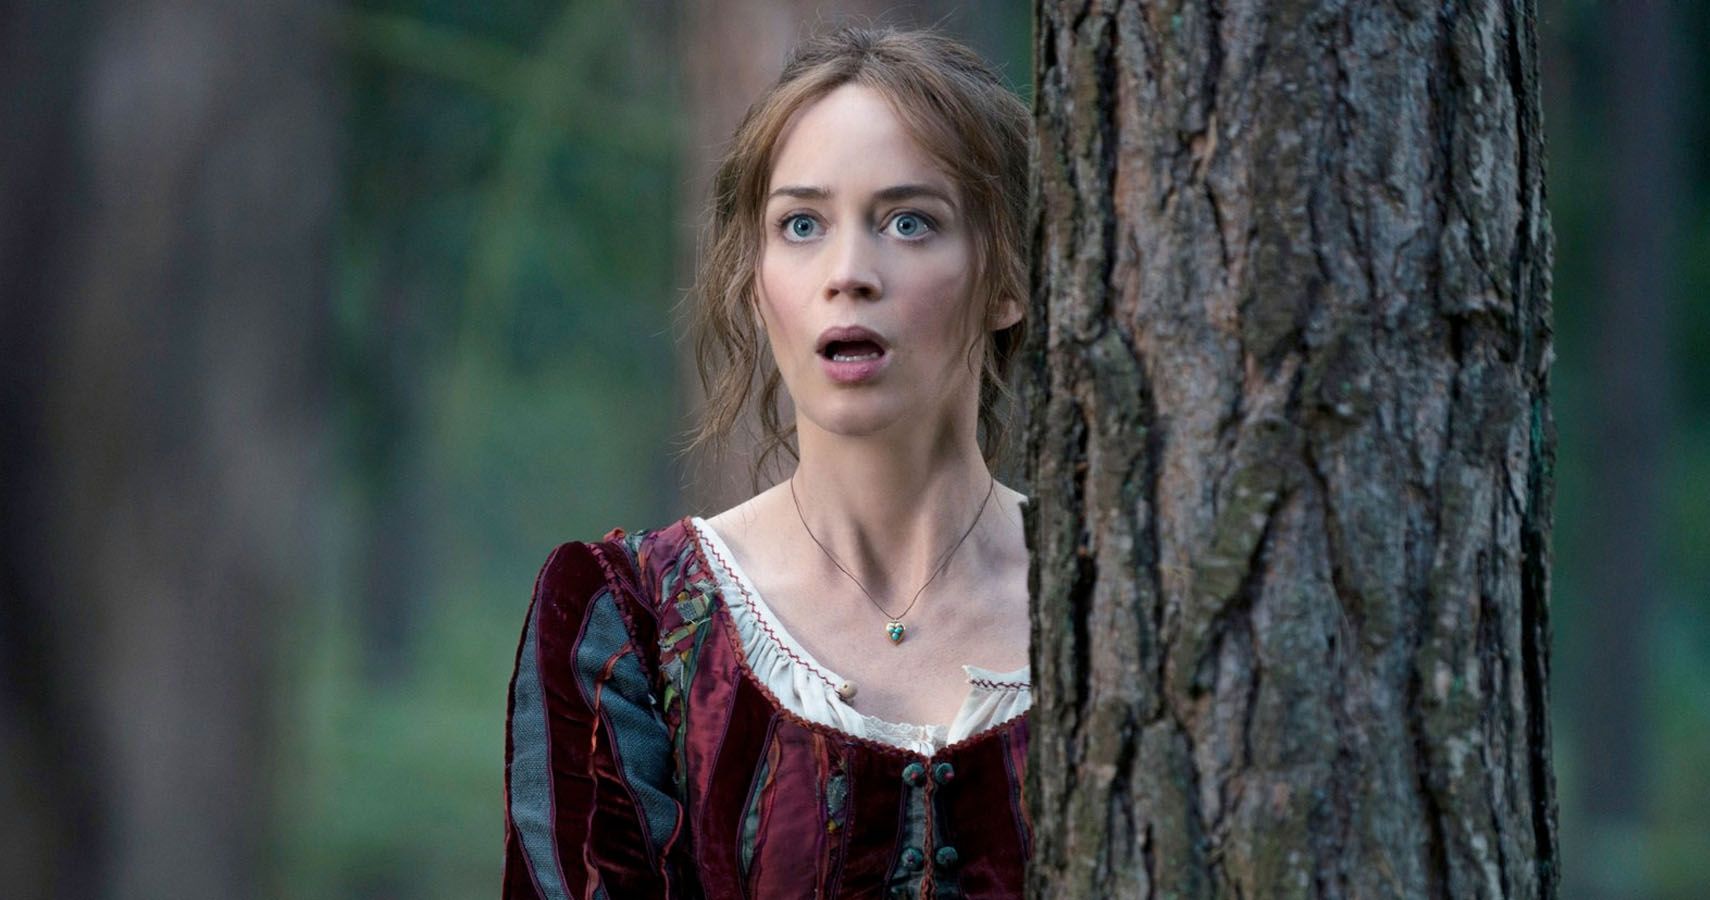 Emily Blunt's 10 Best Movies, According To Rotten Tomatoes